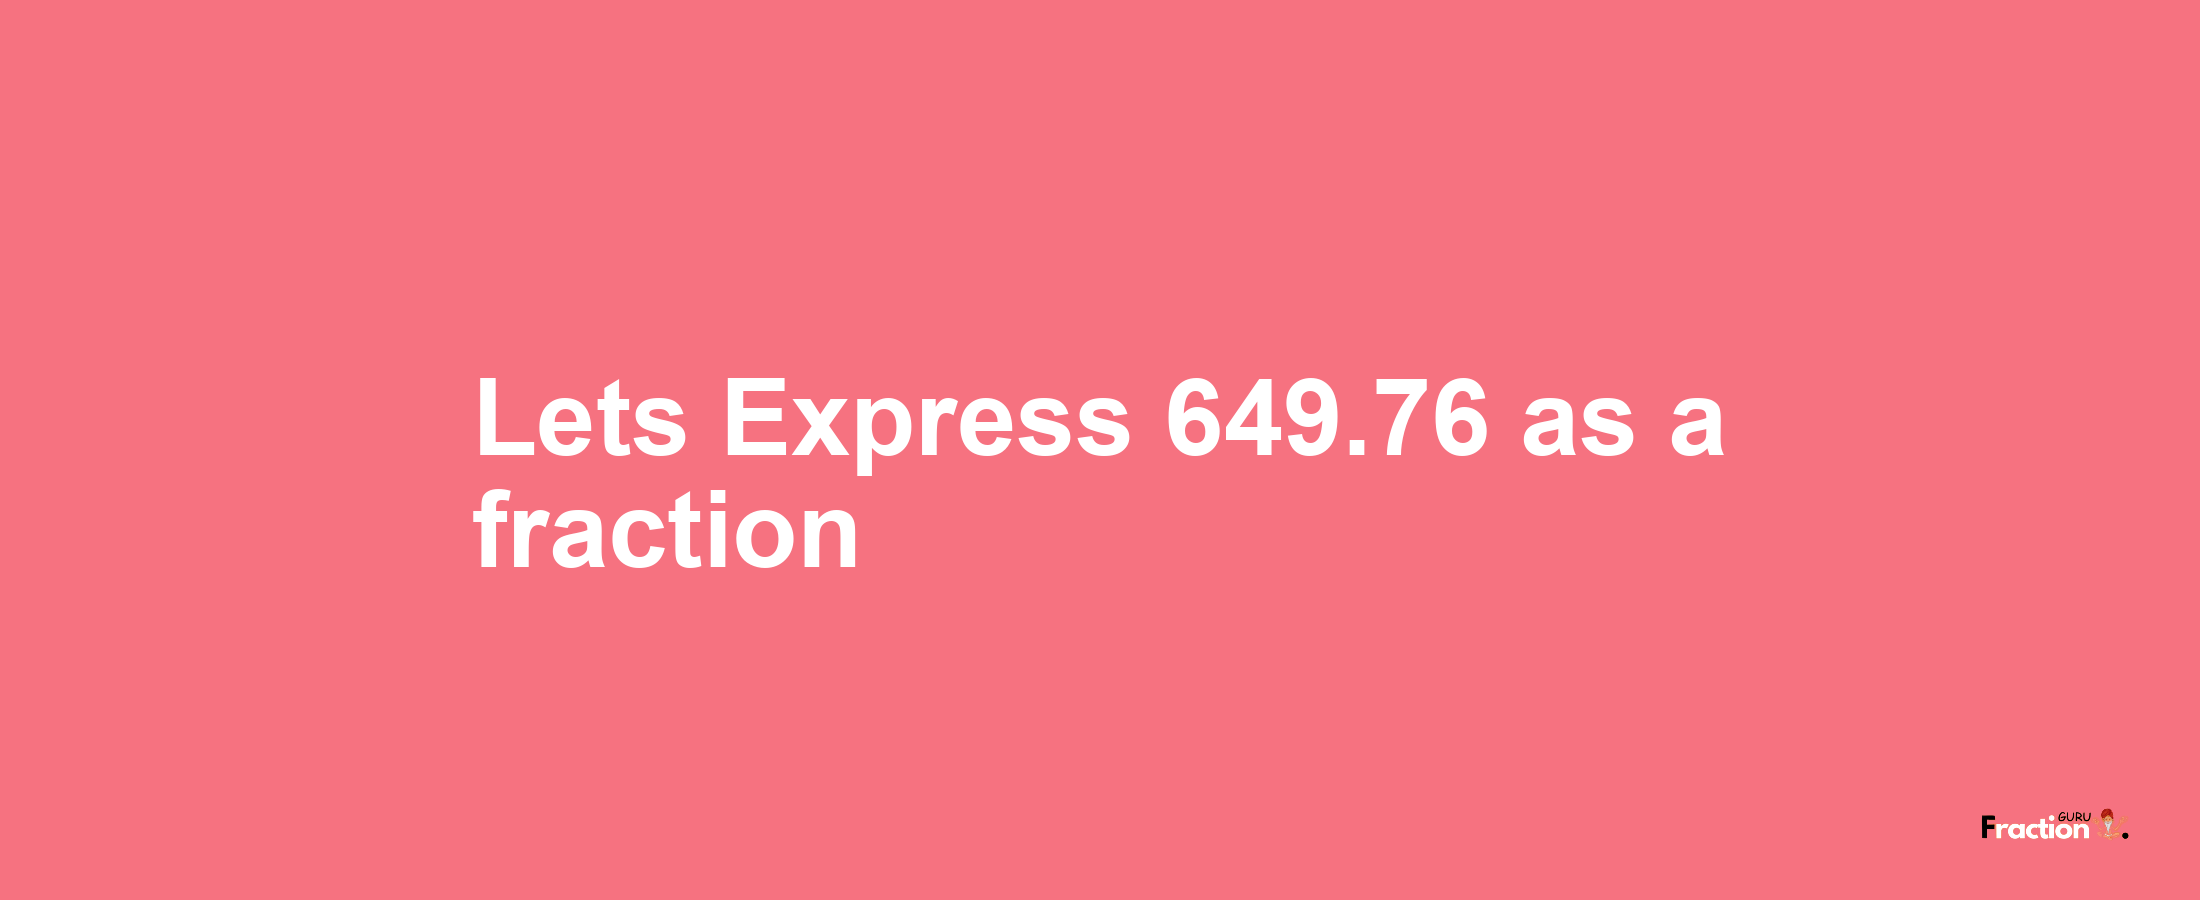 Lets Express 649.76 as afraction